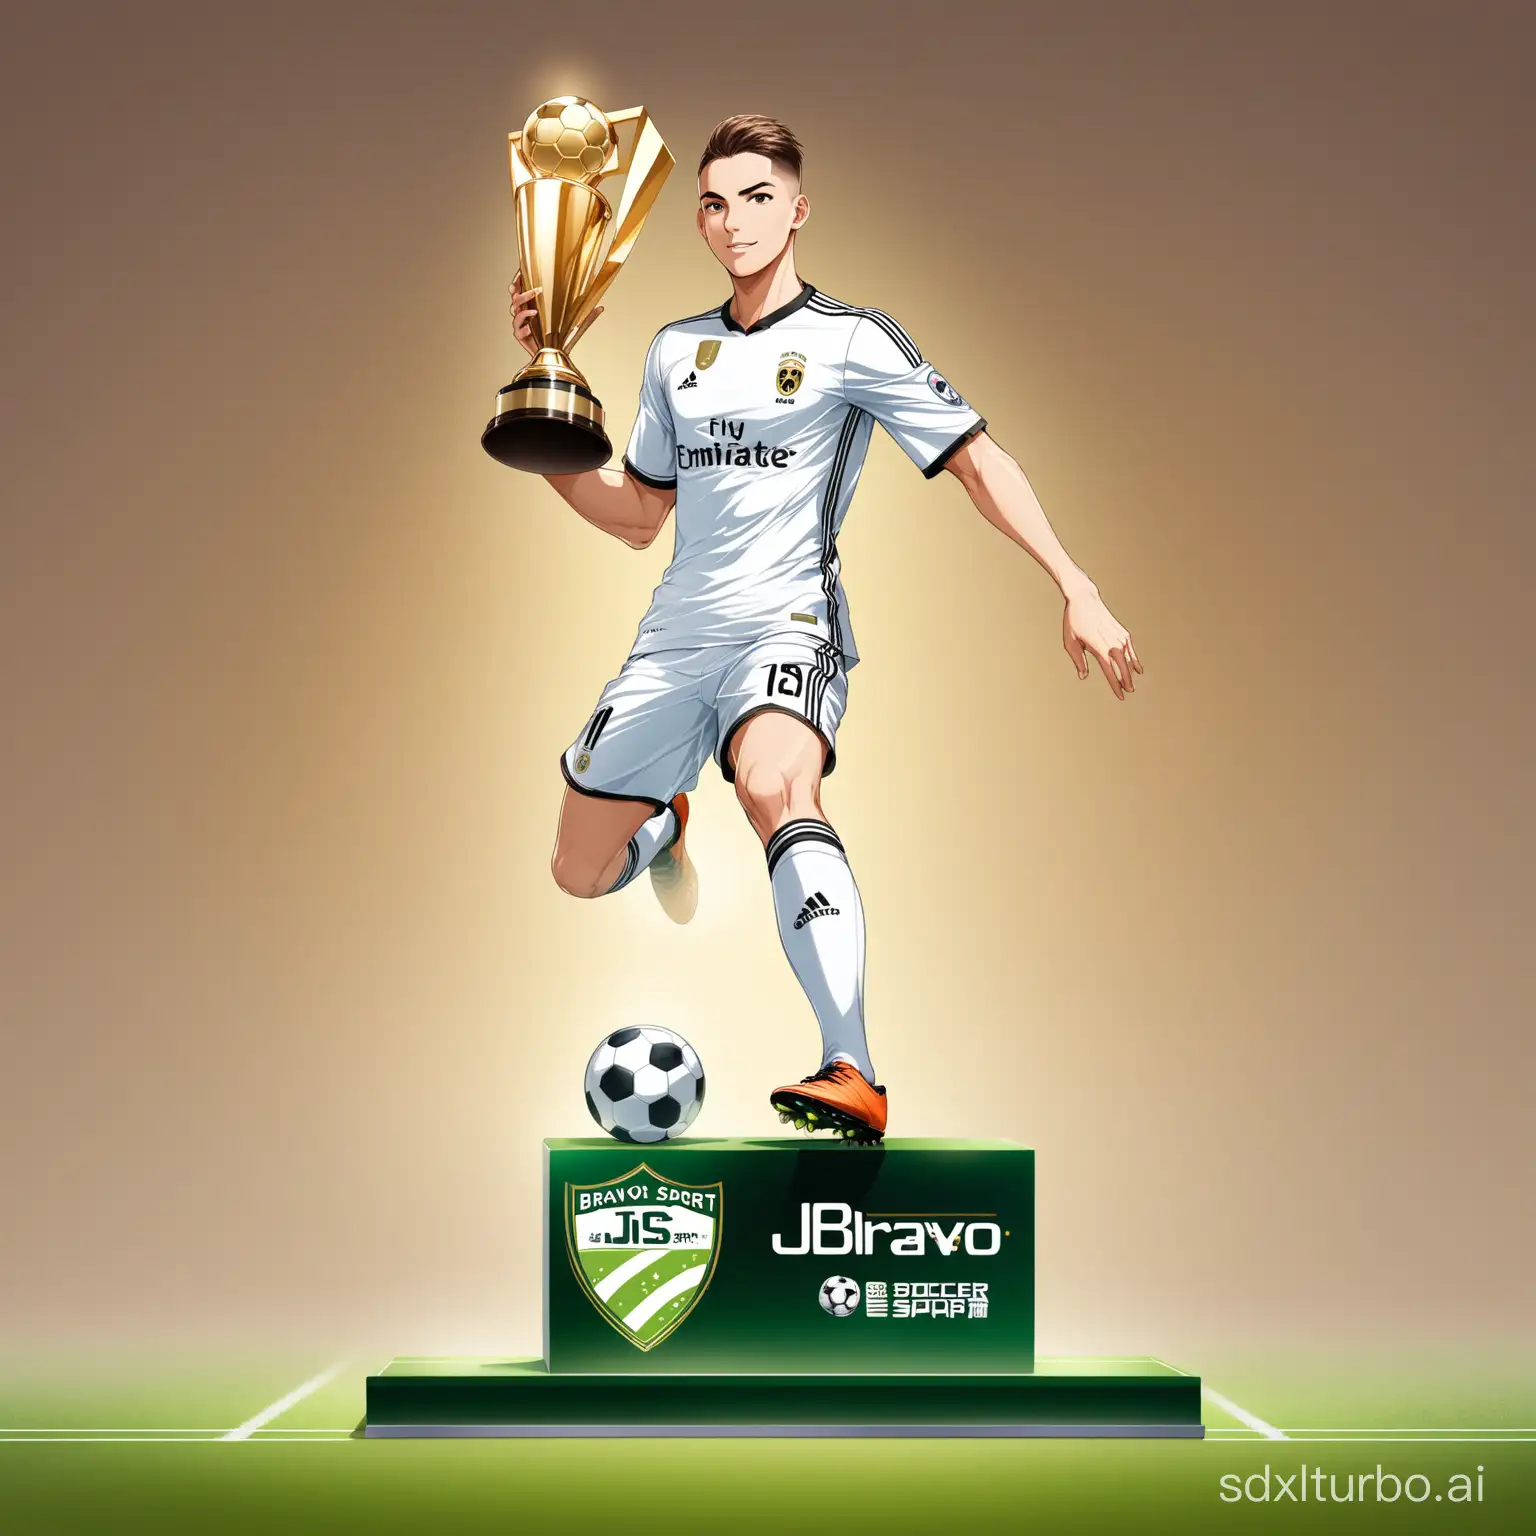 You as an expert in graphic design, create for me a soccer player 11 receiving a trophy and on the back, there is a sign that says the name of JS BRAVO SPORT